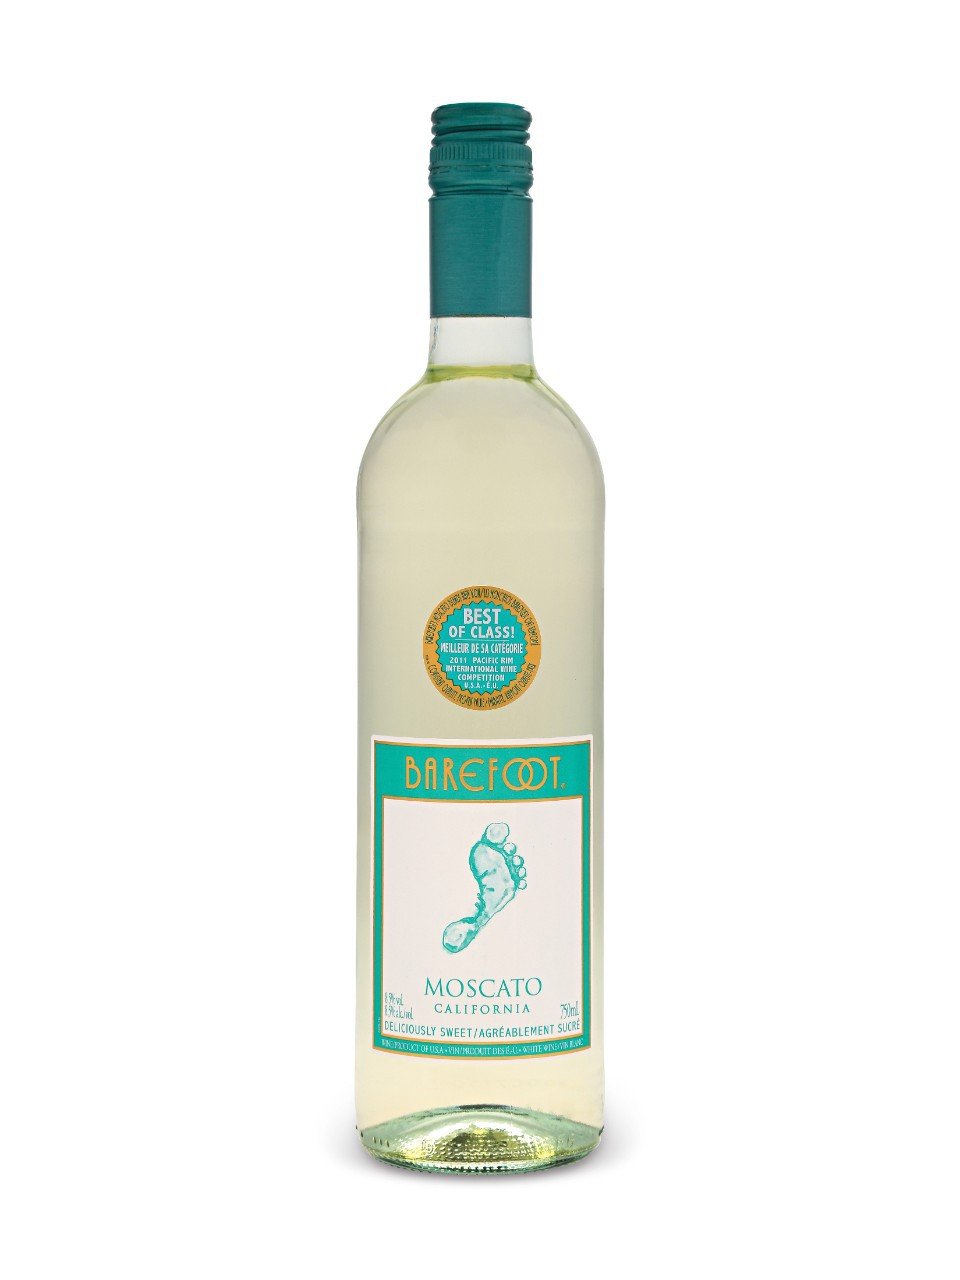 Barefoot Moscato reviews in White Wine